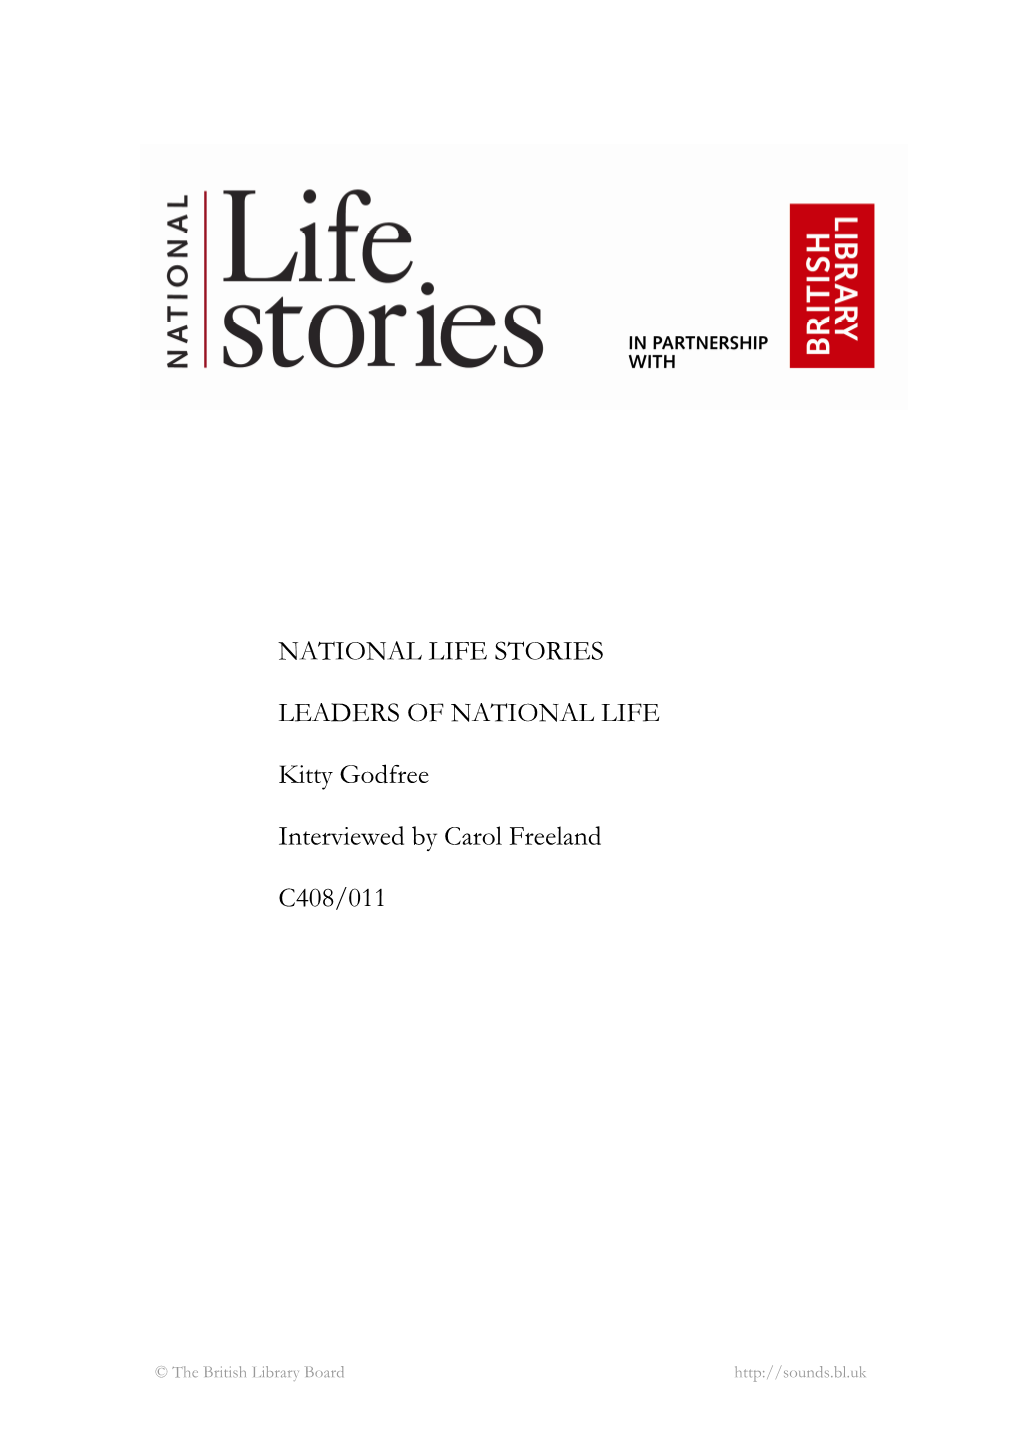 NATIONAL LIFE STORIES LEADERS of NATIONAL LIFE Kitty Godfree